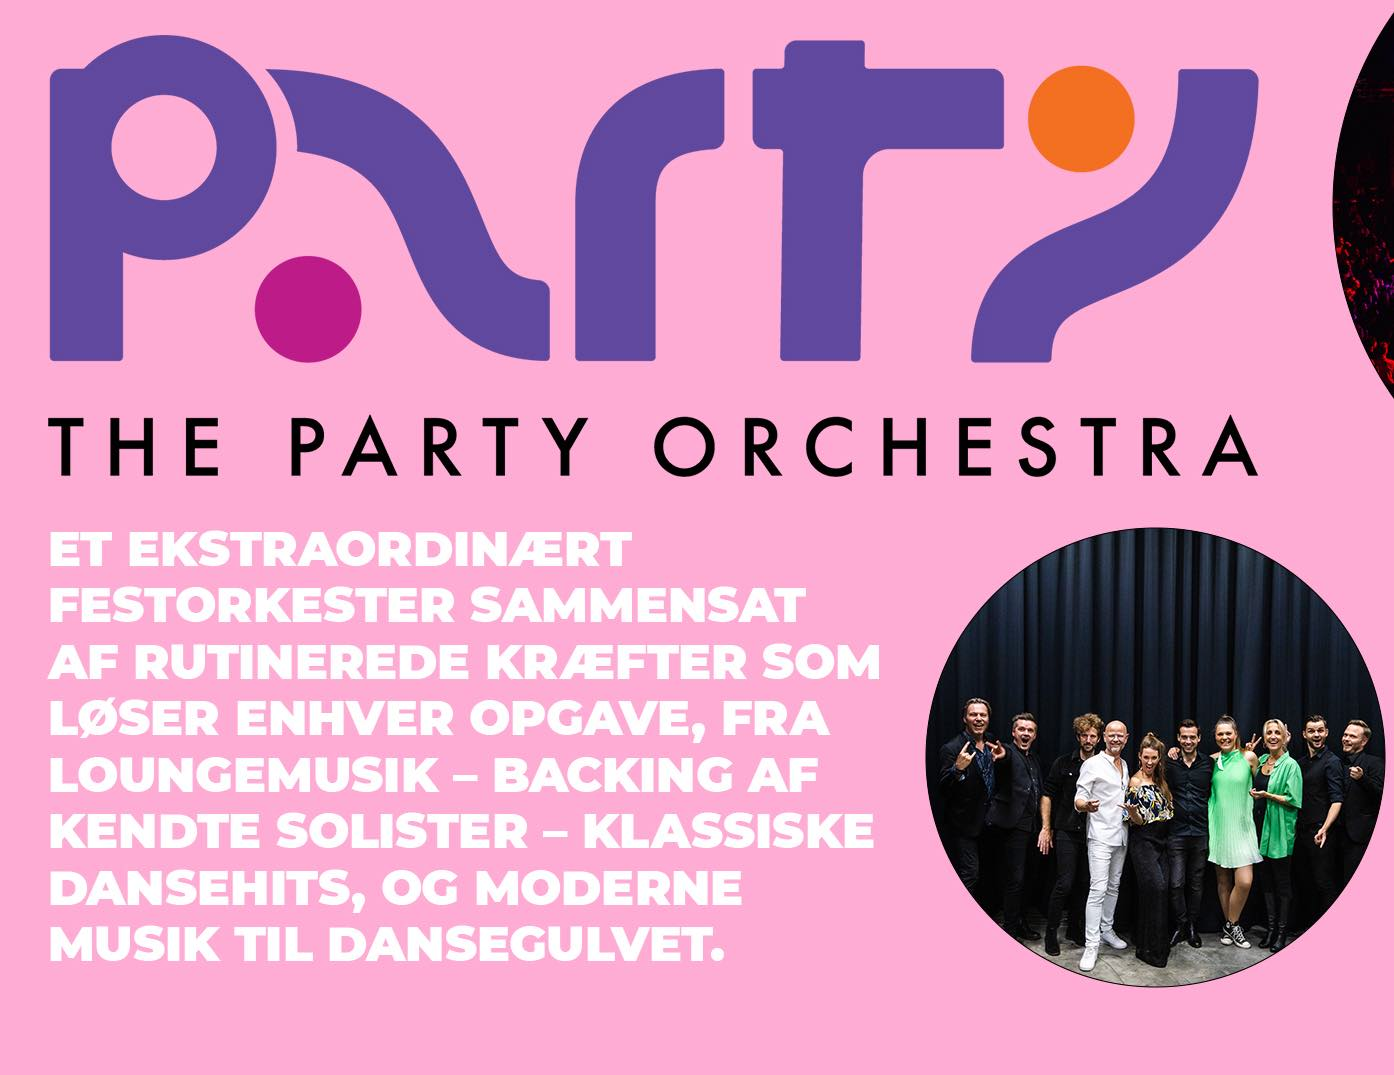 The Party Orchestra